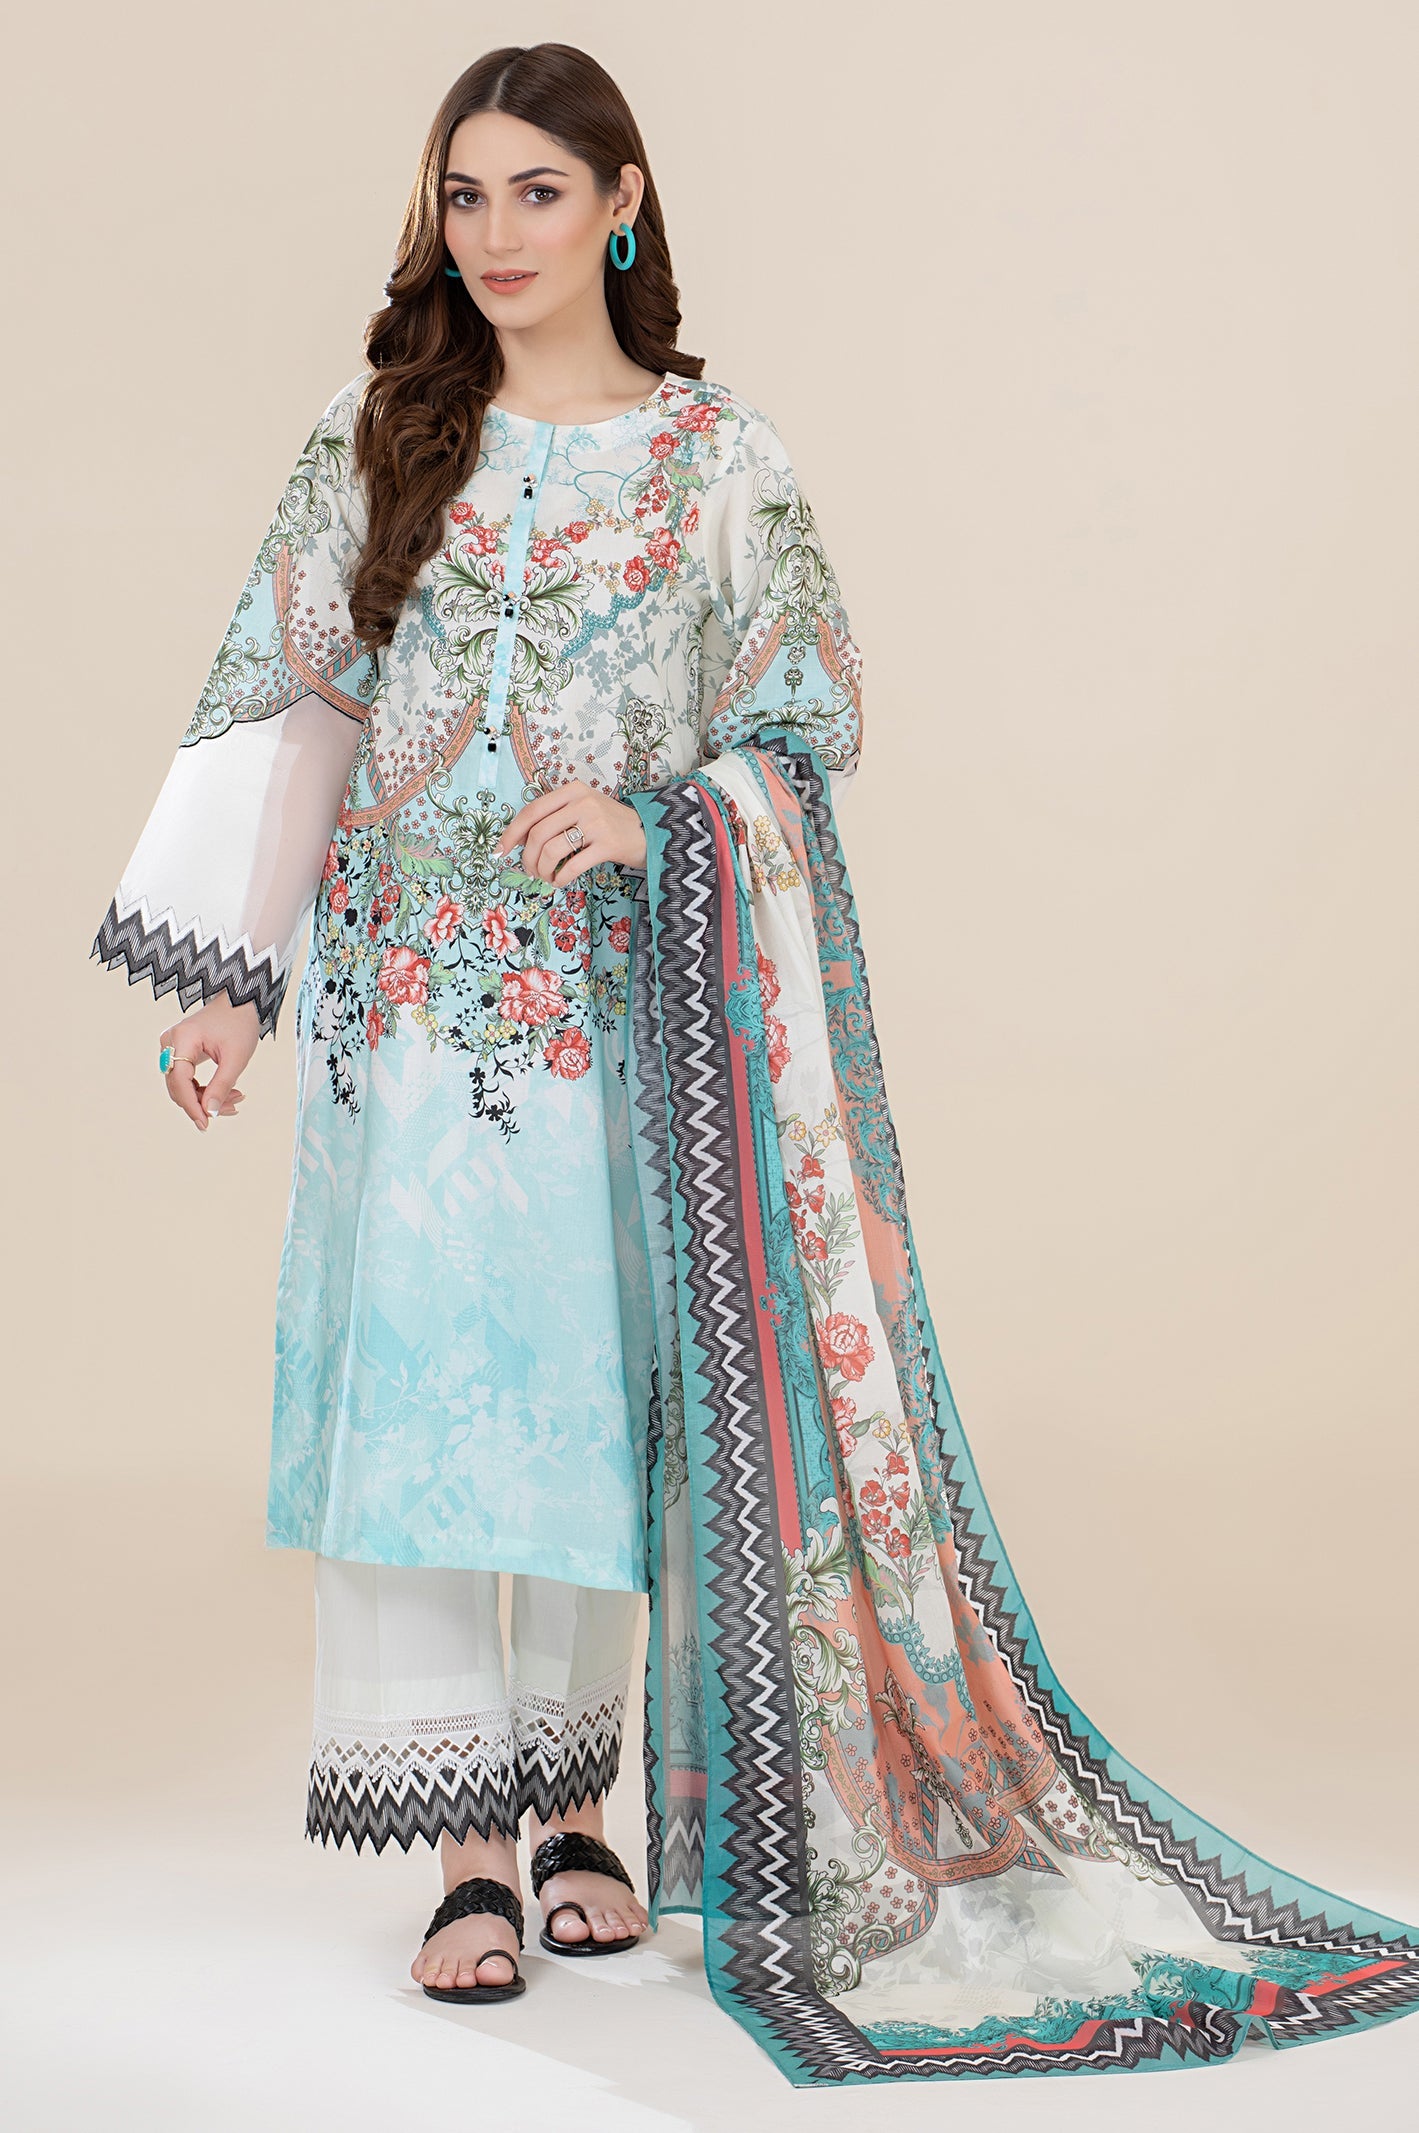 Unstitched 2 Piece Cambric Printed Shirt, Lawn Printed Dupatta - Diners